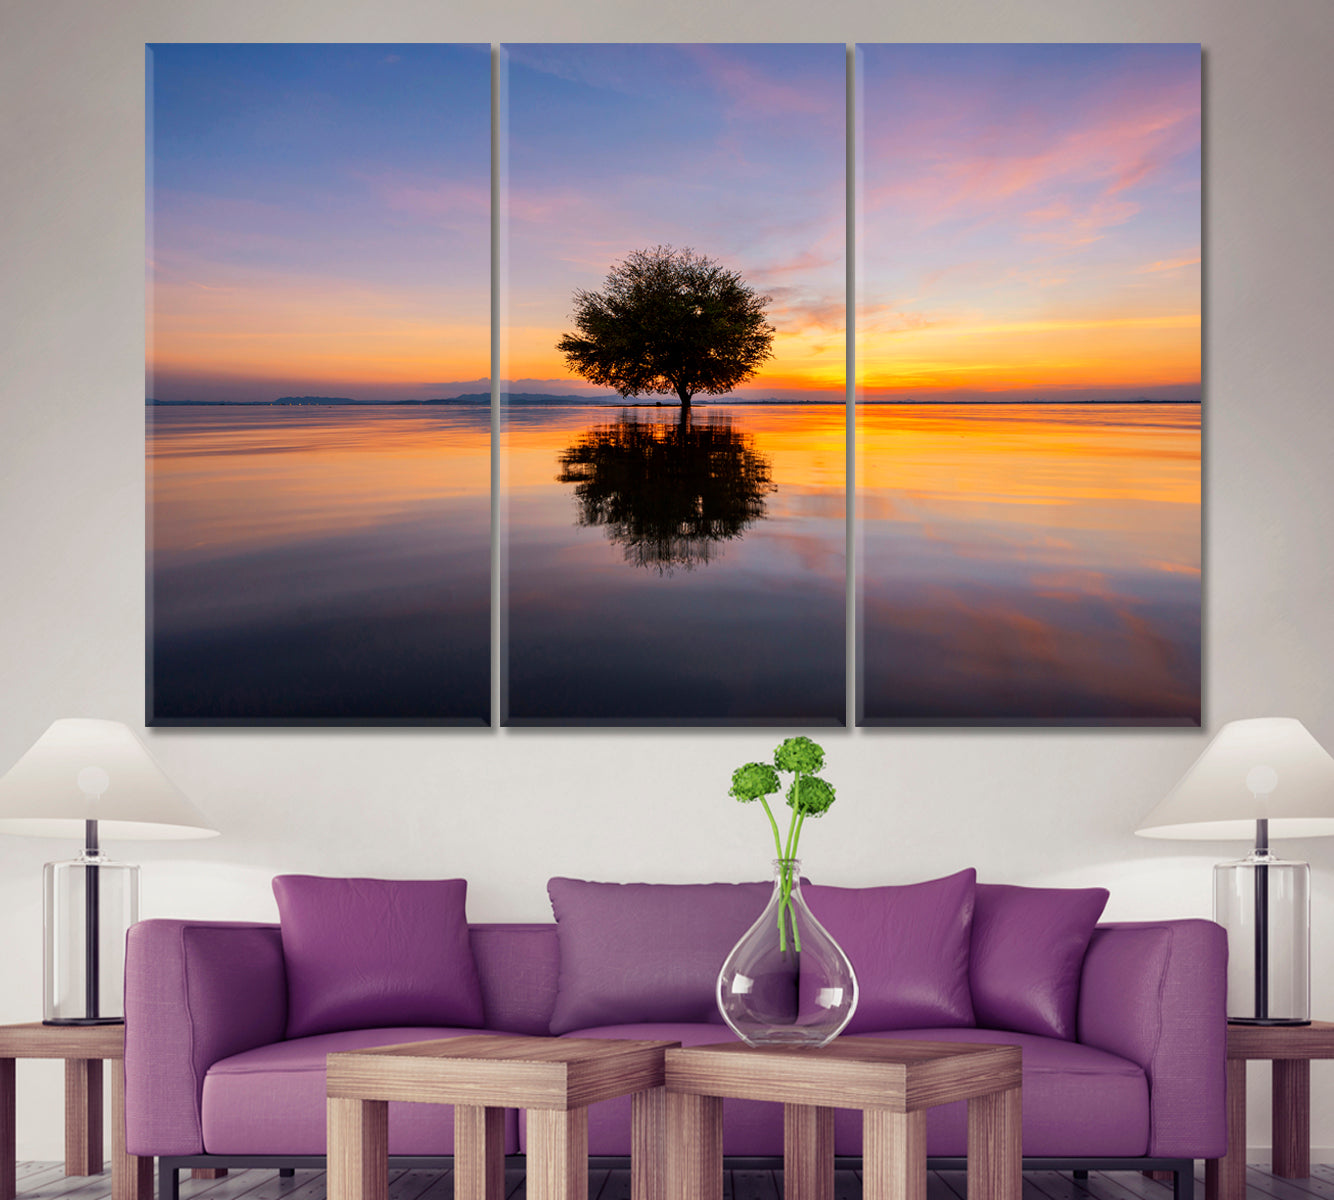 Breathtaking Landscape Inspired by Nature Sunset Over Water Flooded Trees Scenery Landscape Fine Art Print Artesty 3 panels 36" x 24" 